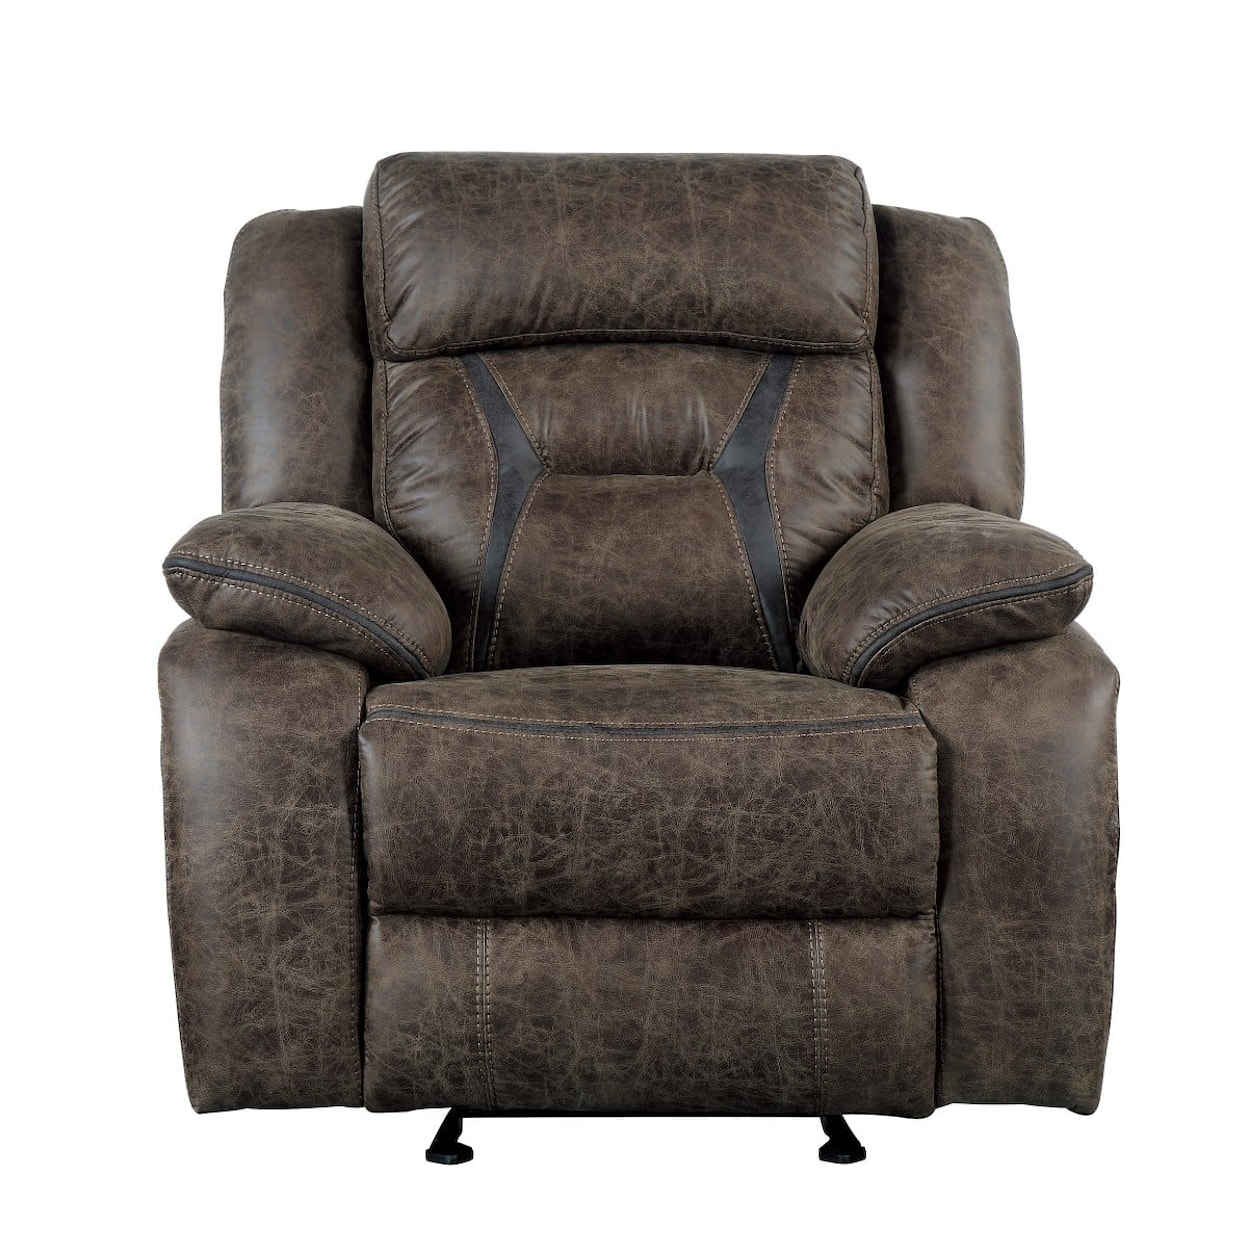 Homelegance Furniture Hill Madrona Glider Reclining Chair